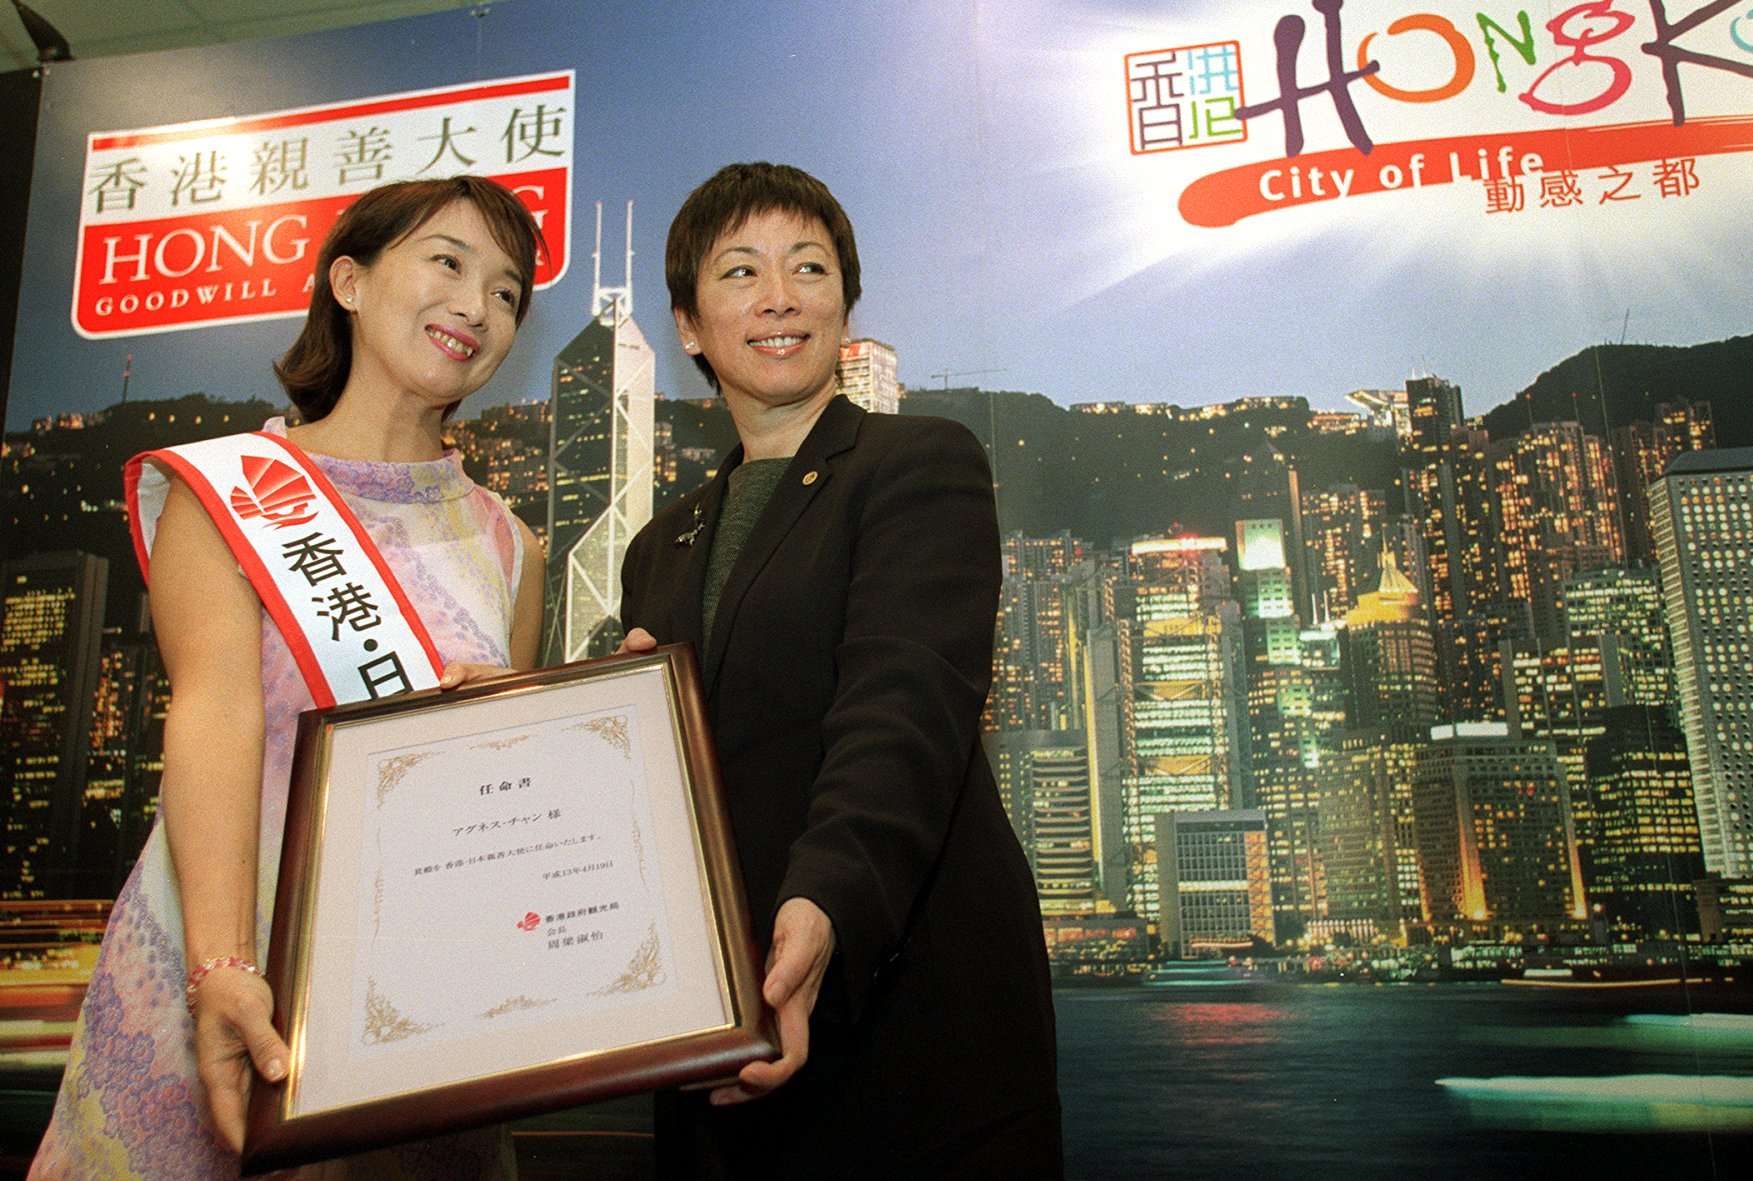 Agnes Chan (left) is appointed Hong Kong goodwill ambassador by then Tourism Board chair, Selina Chow, in April 2001. Bold-thinking, streetwise and deeply caring, Chan seems tailor-made for the role of education secretary. Photo: David Wong